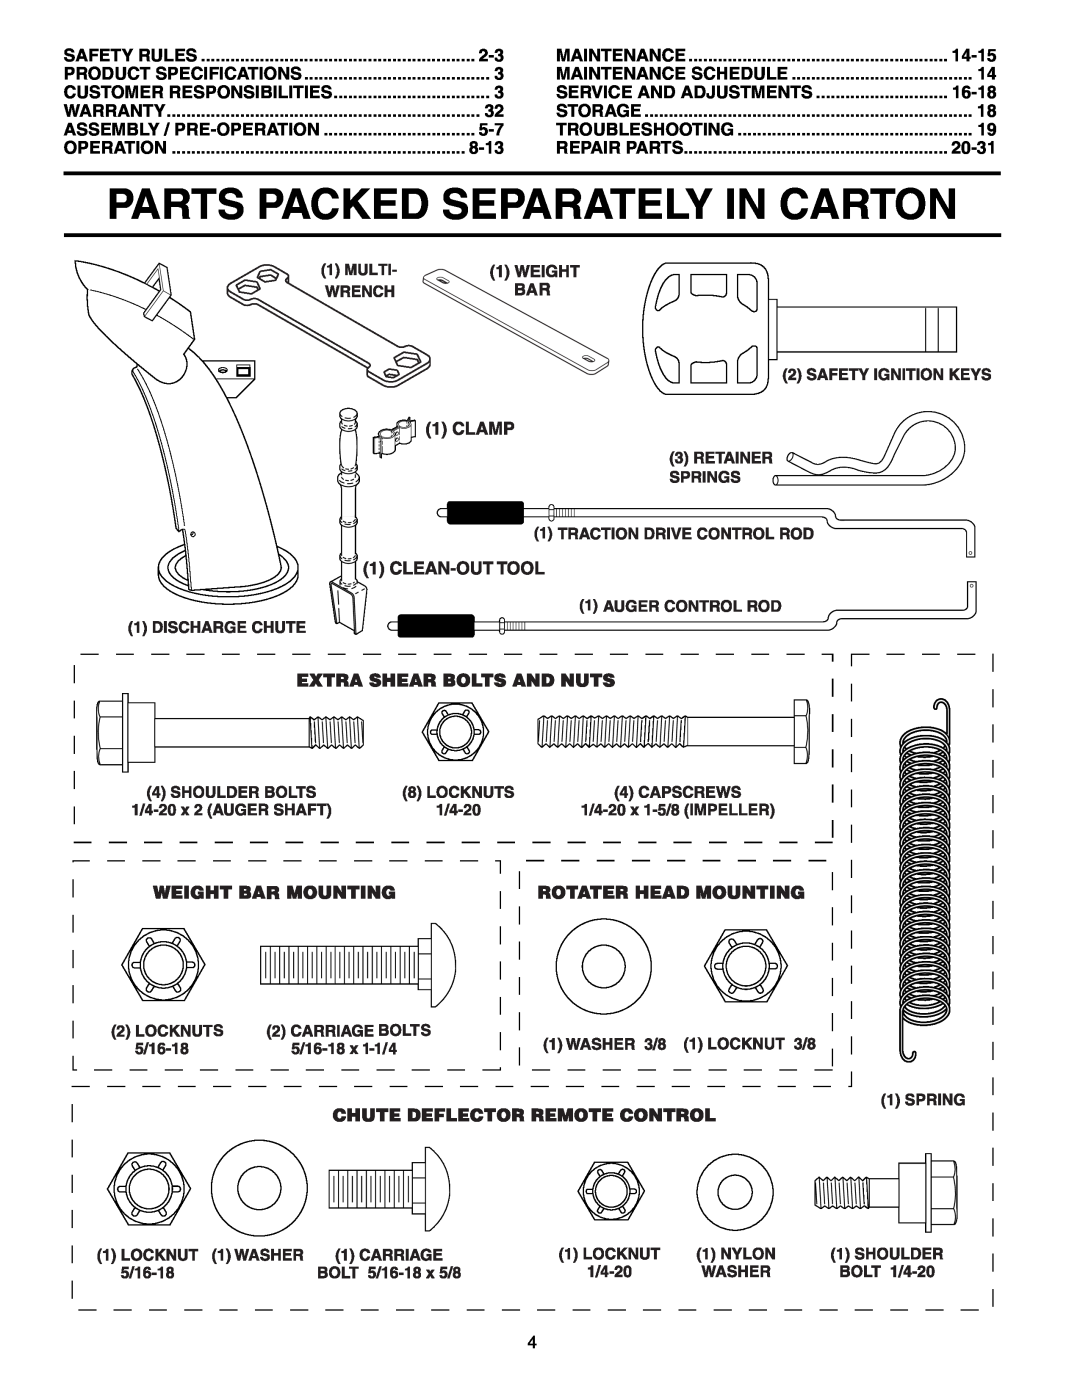 Poulan PP1130ESC Parts Packed Separately In Carton, 8-13, 14-15, Service And Adjustments, 16-18, 20-31, Safety Rules 